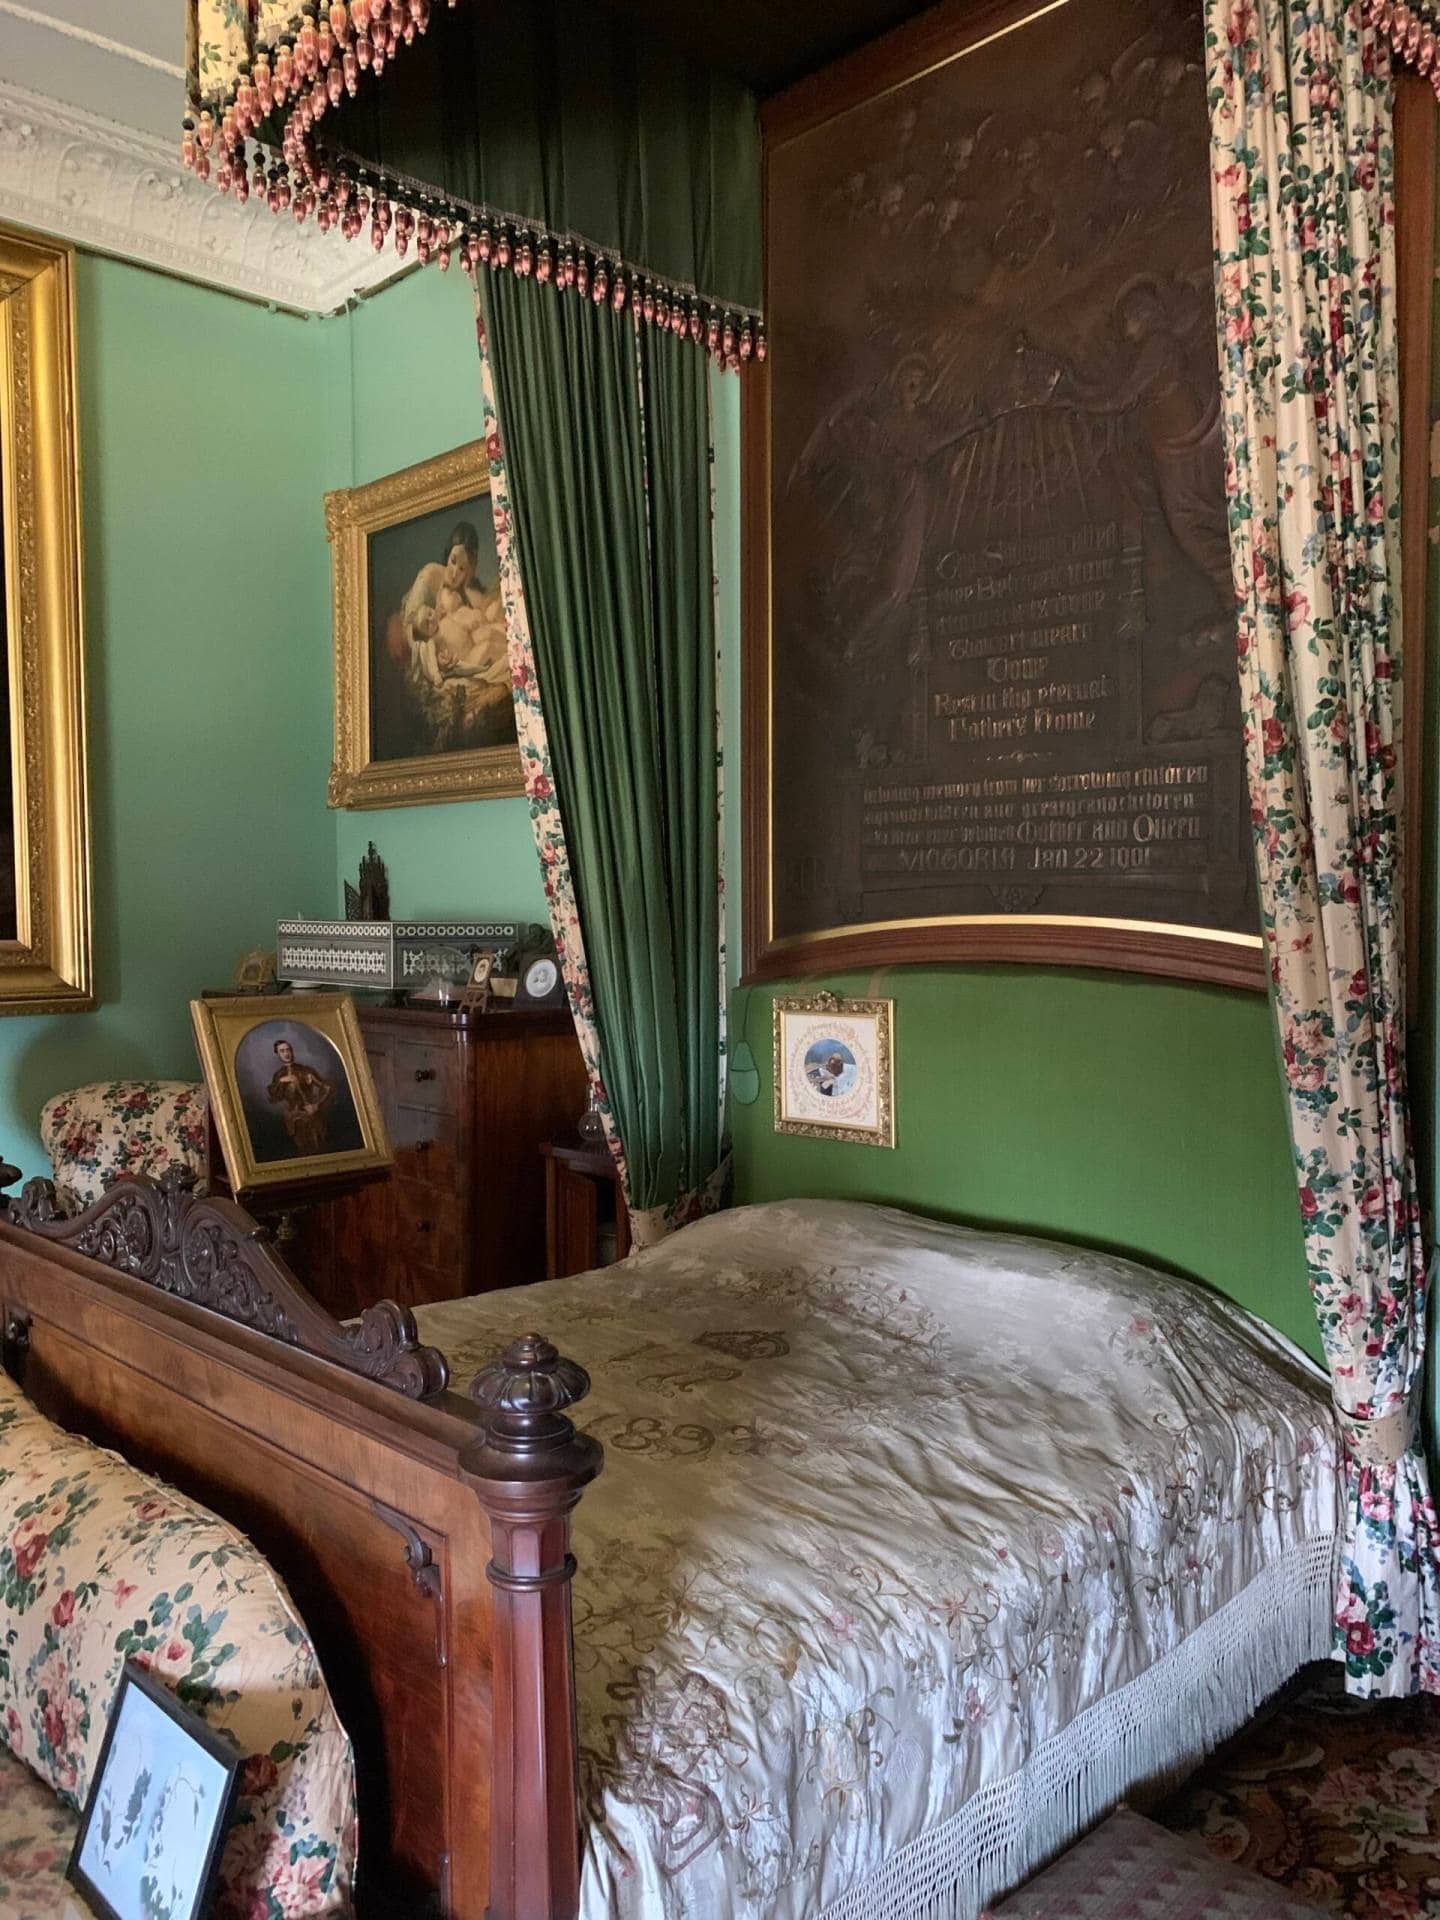 Queen Victoria died in this bed at Osborne House in 1901